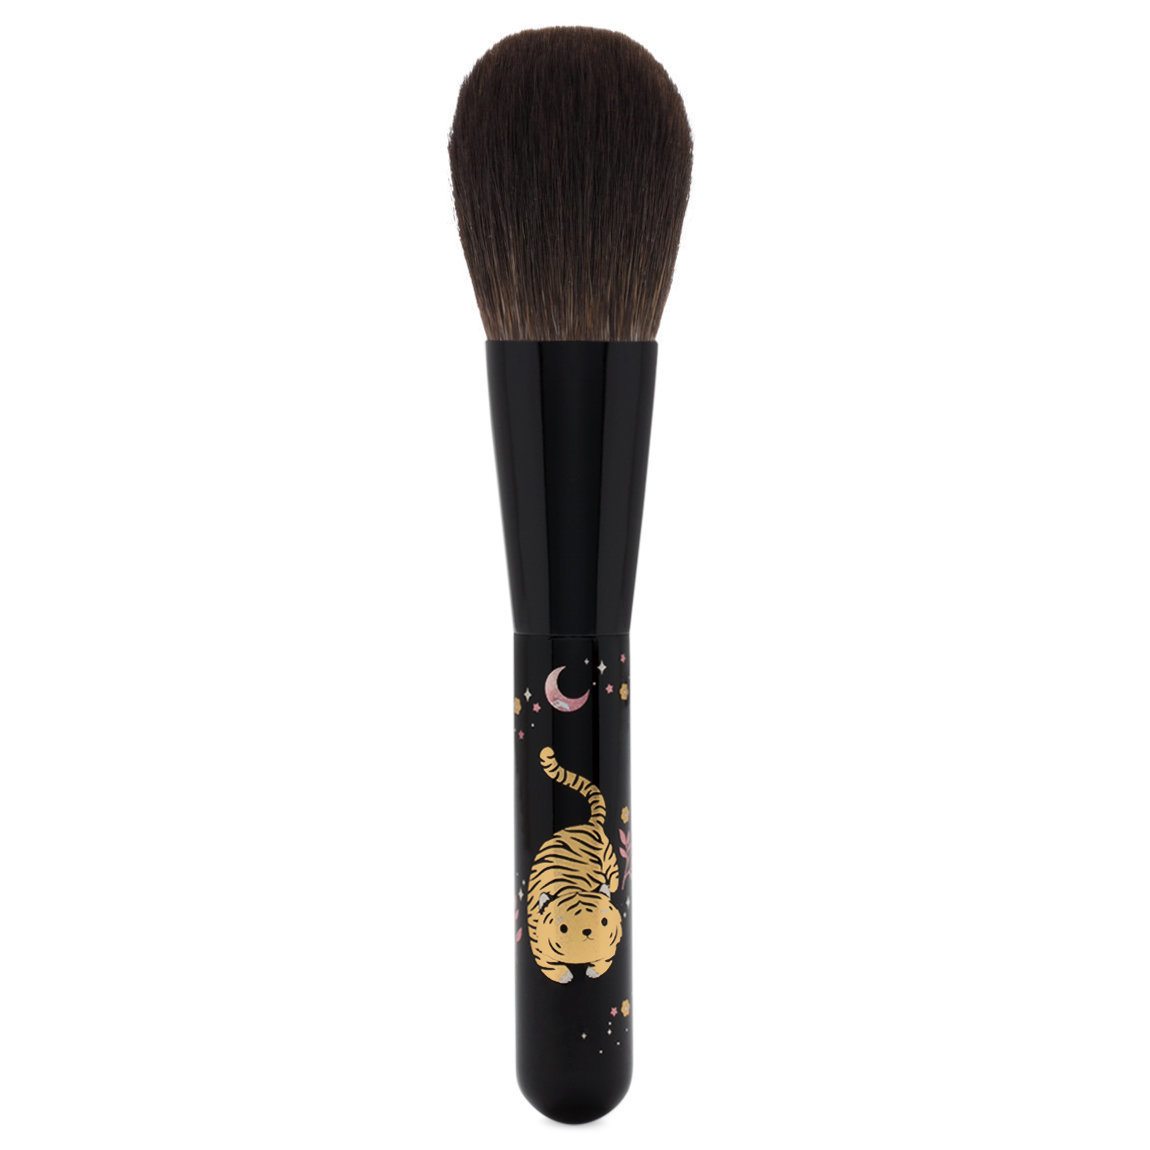 Beautylish Presents The Lunar New Year Brush Year of the Tiger alternative view 1 - product swatch.